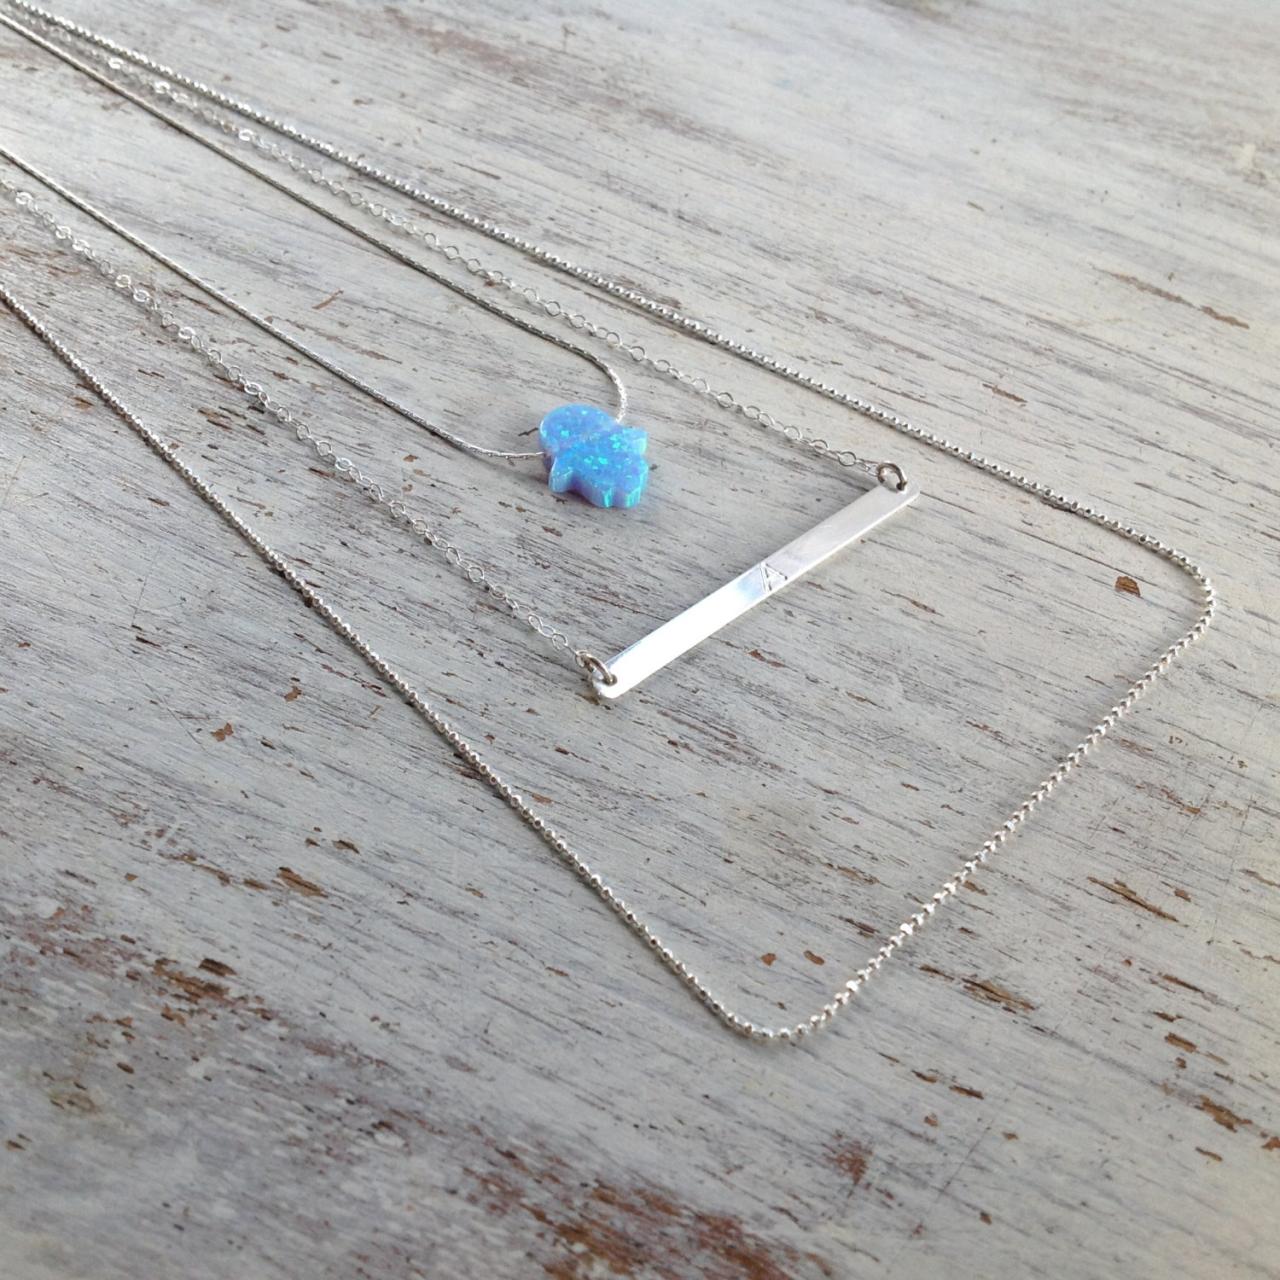 Layer necklace, set of 3 necklaces, sterling silver necklace, hamsa opal necklace, layering necklaces, opal necklace, layered necklaces B202